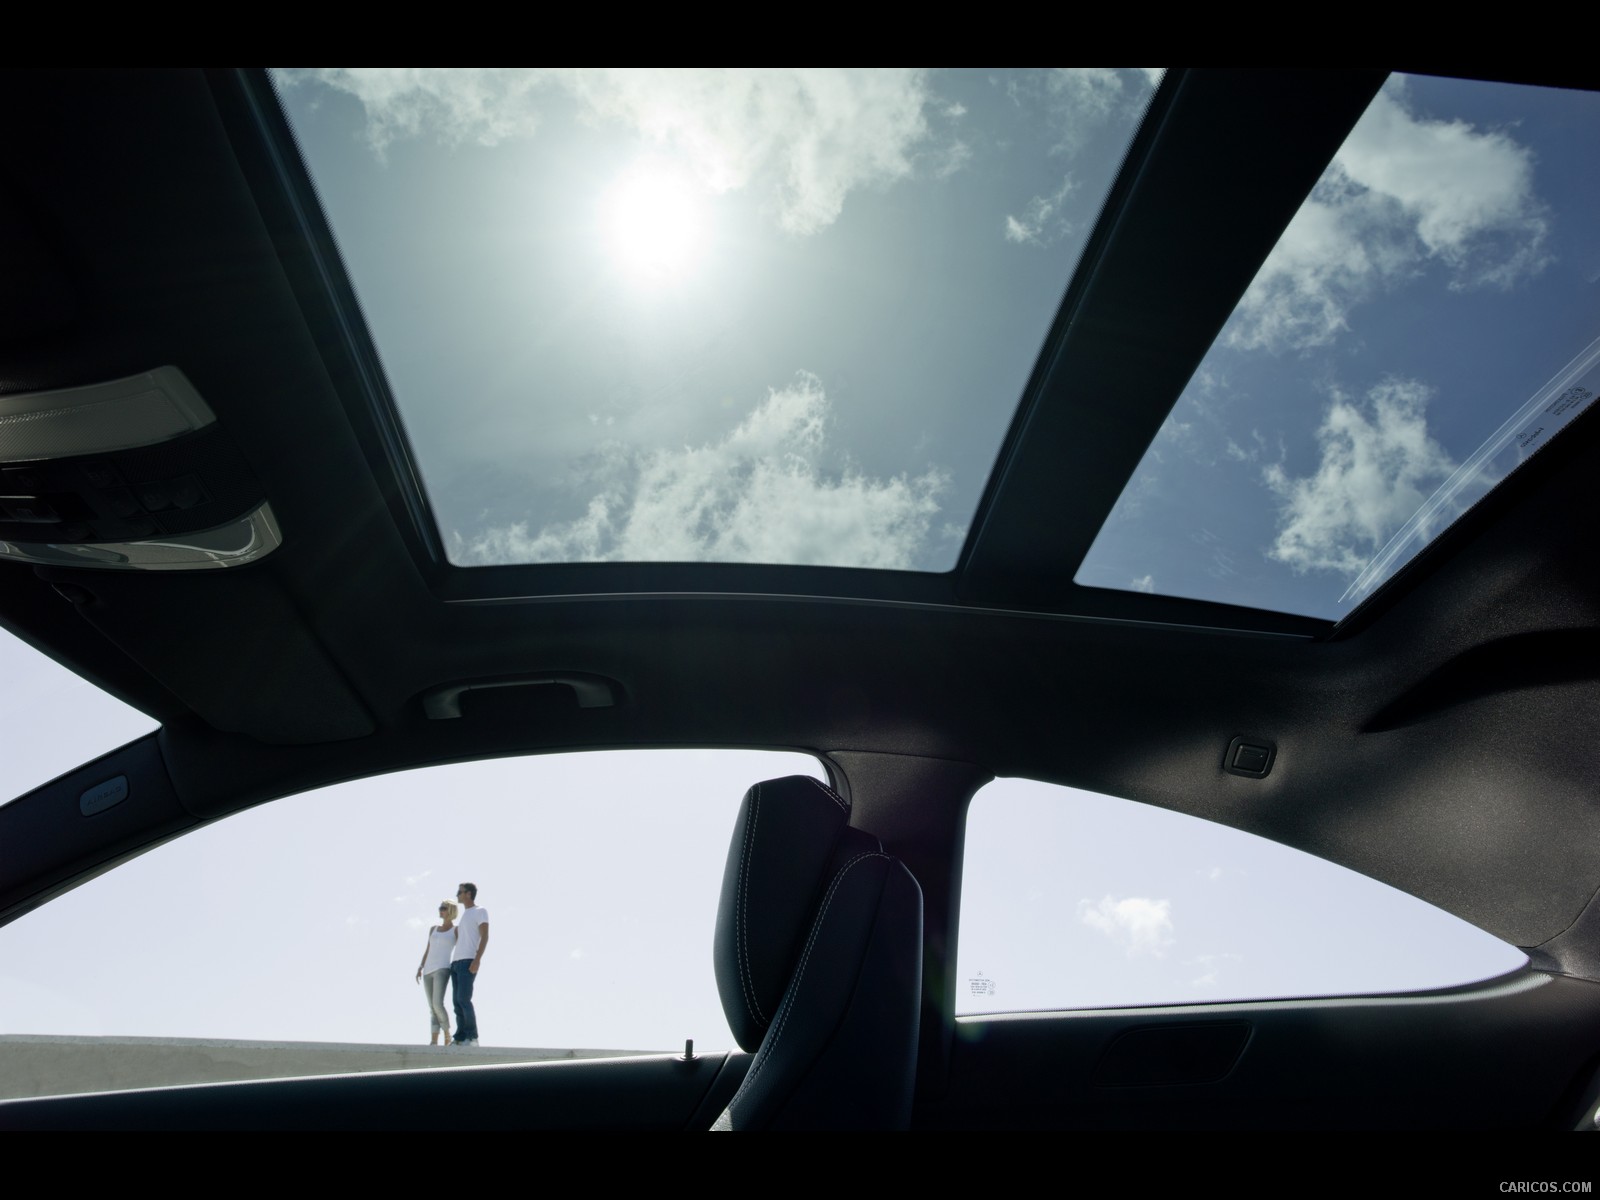 Mercedes Benz C Class Coupe 2012 Panoramic Sunroof Caricos